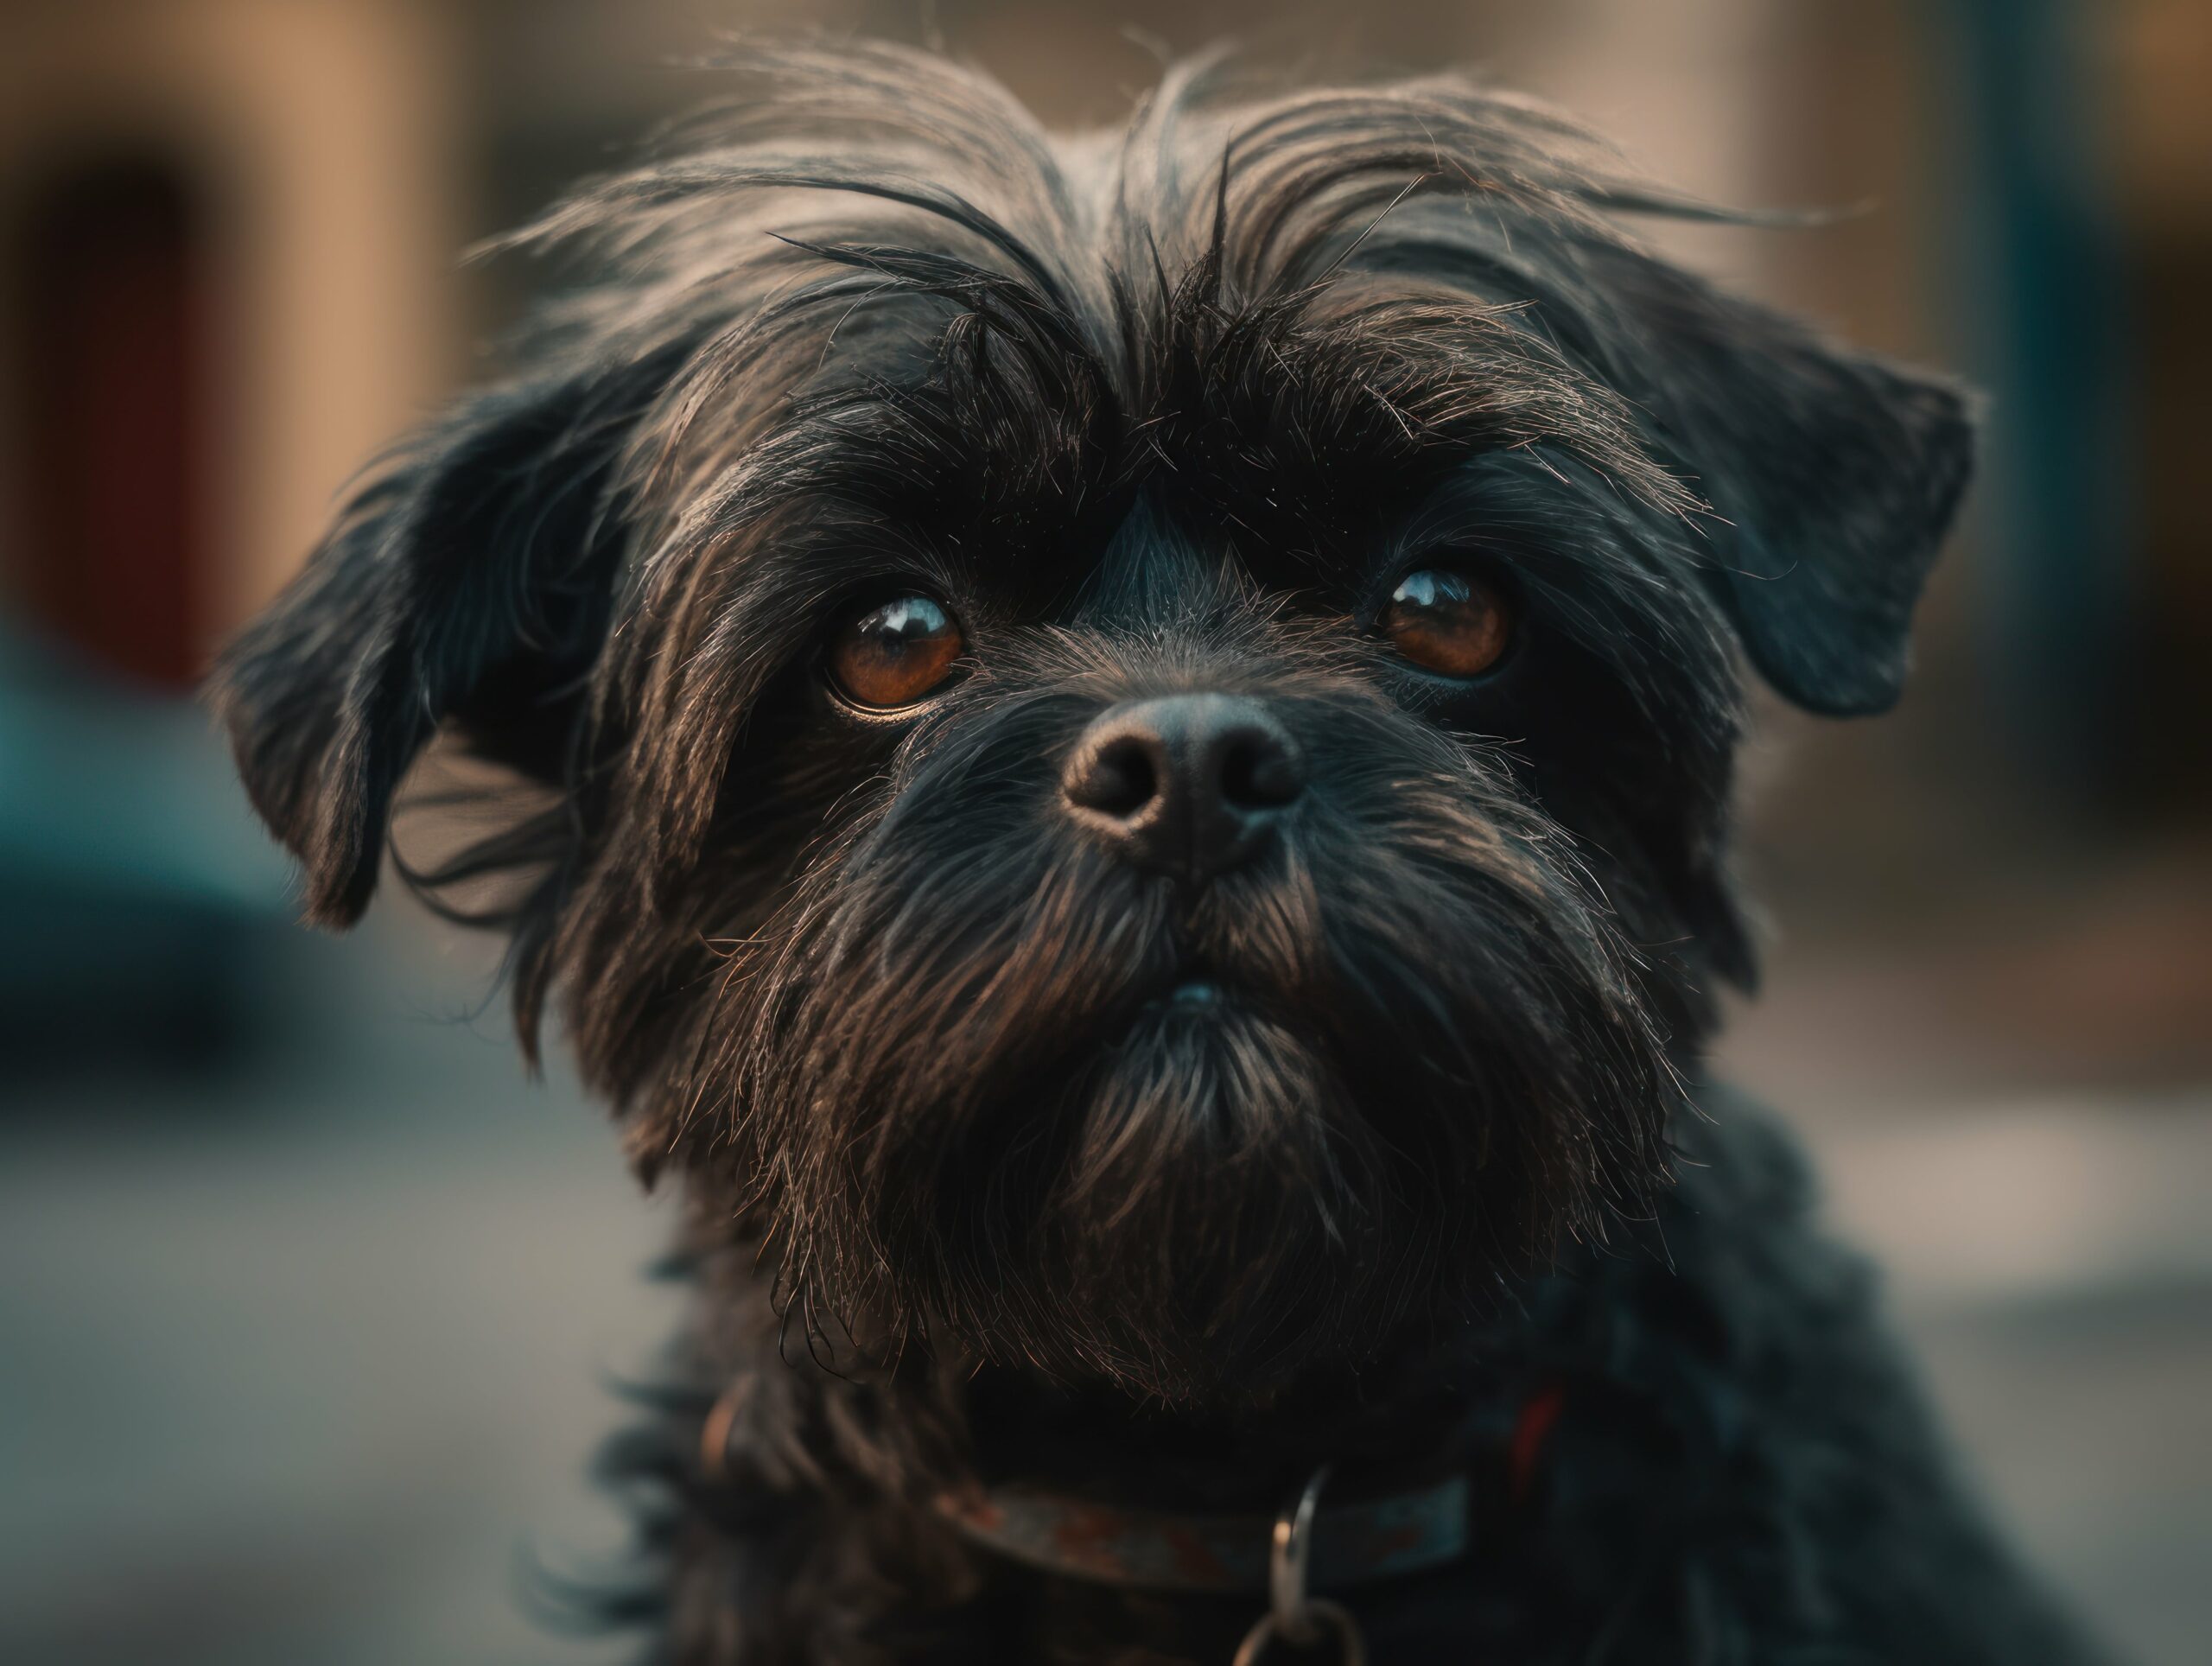 Affenpinscher is from the Small Dog Breeds